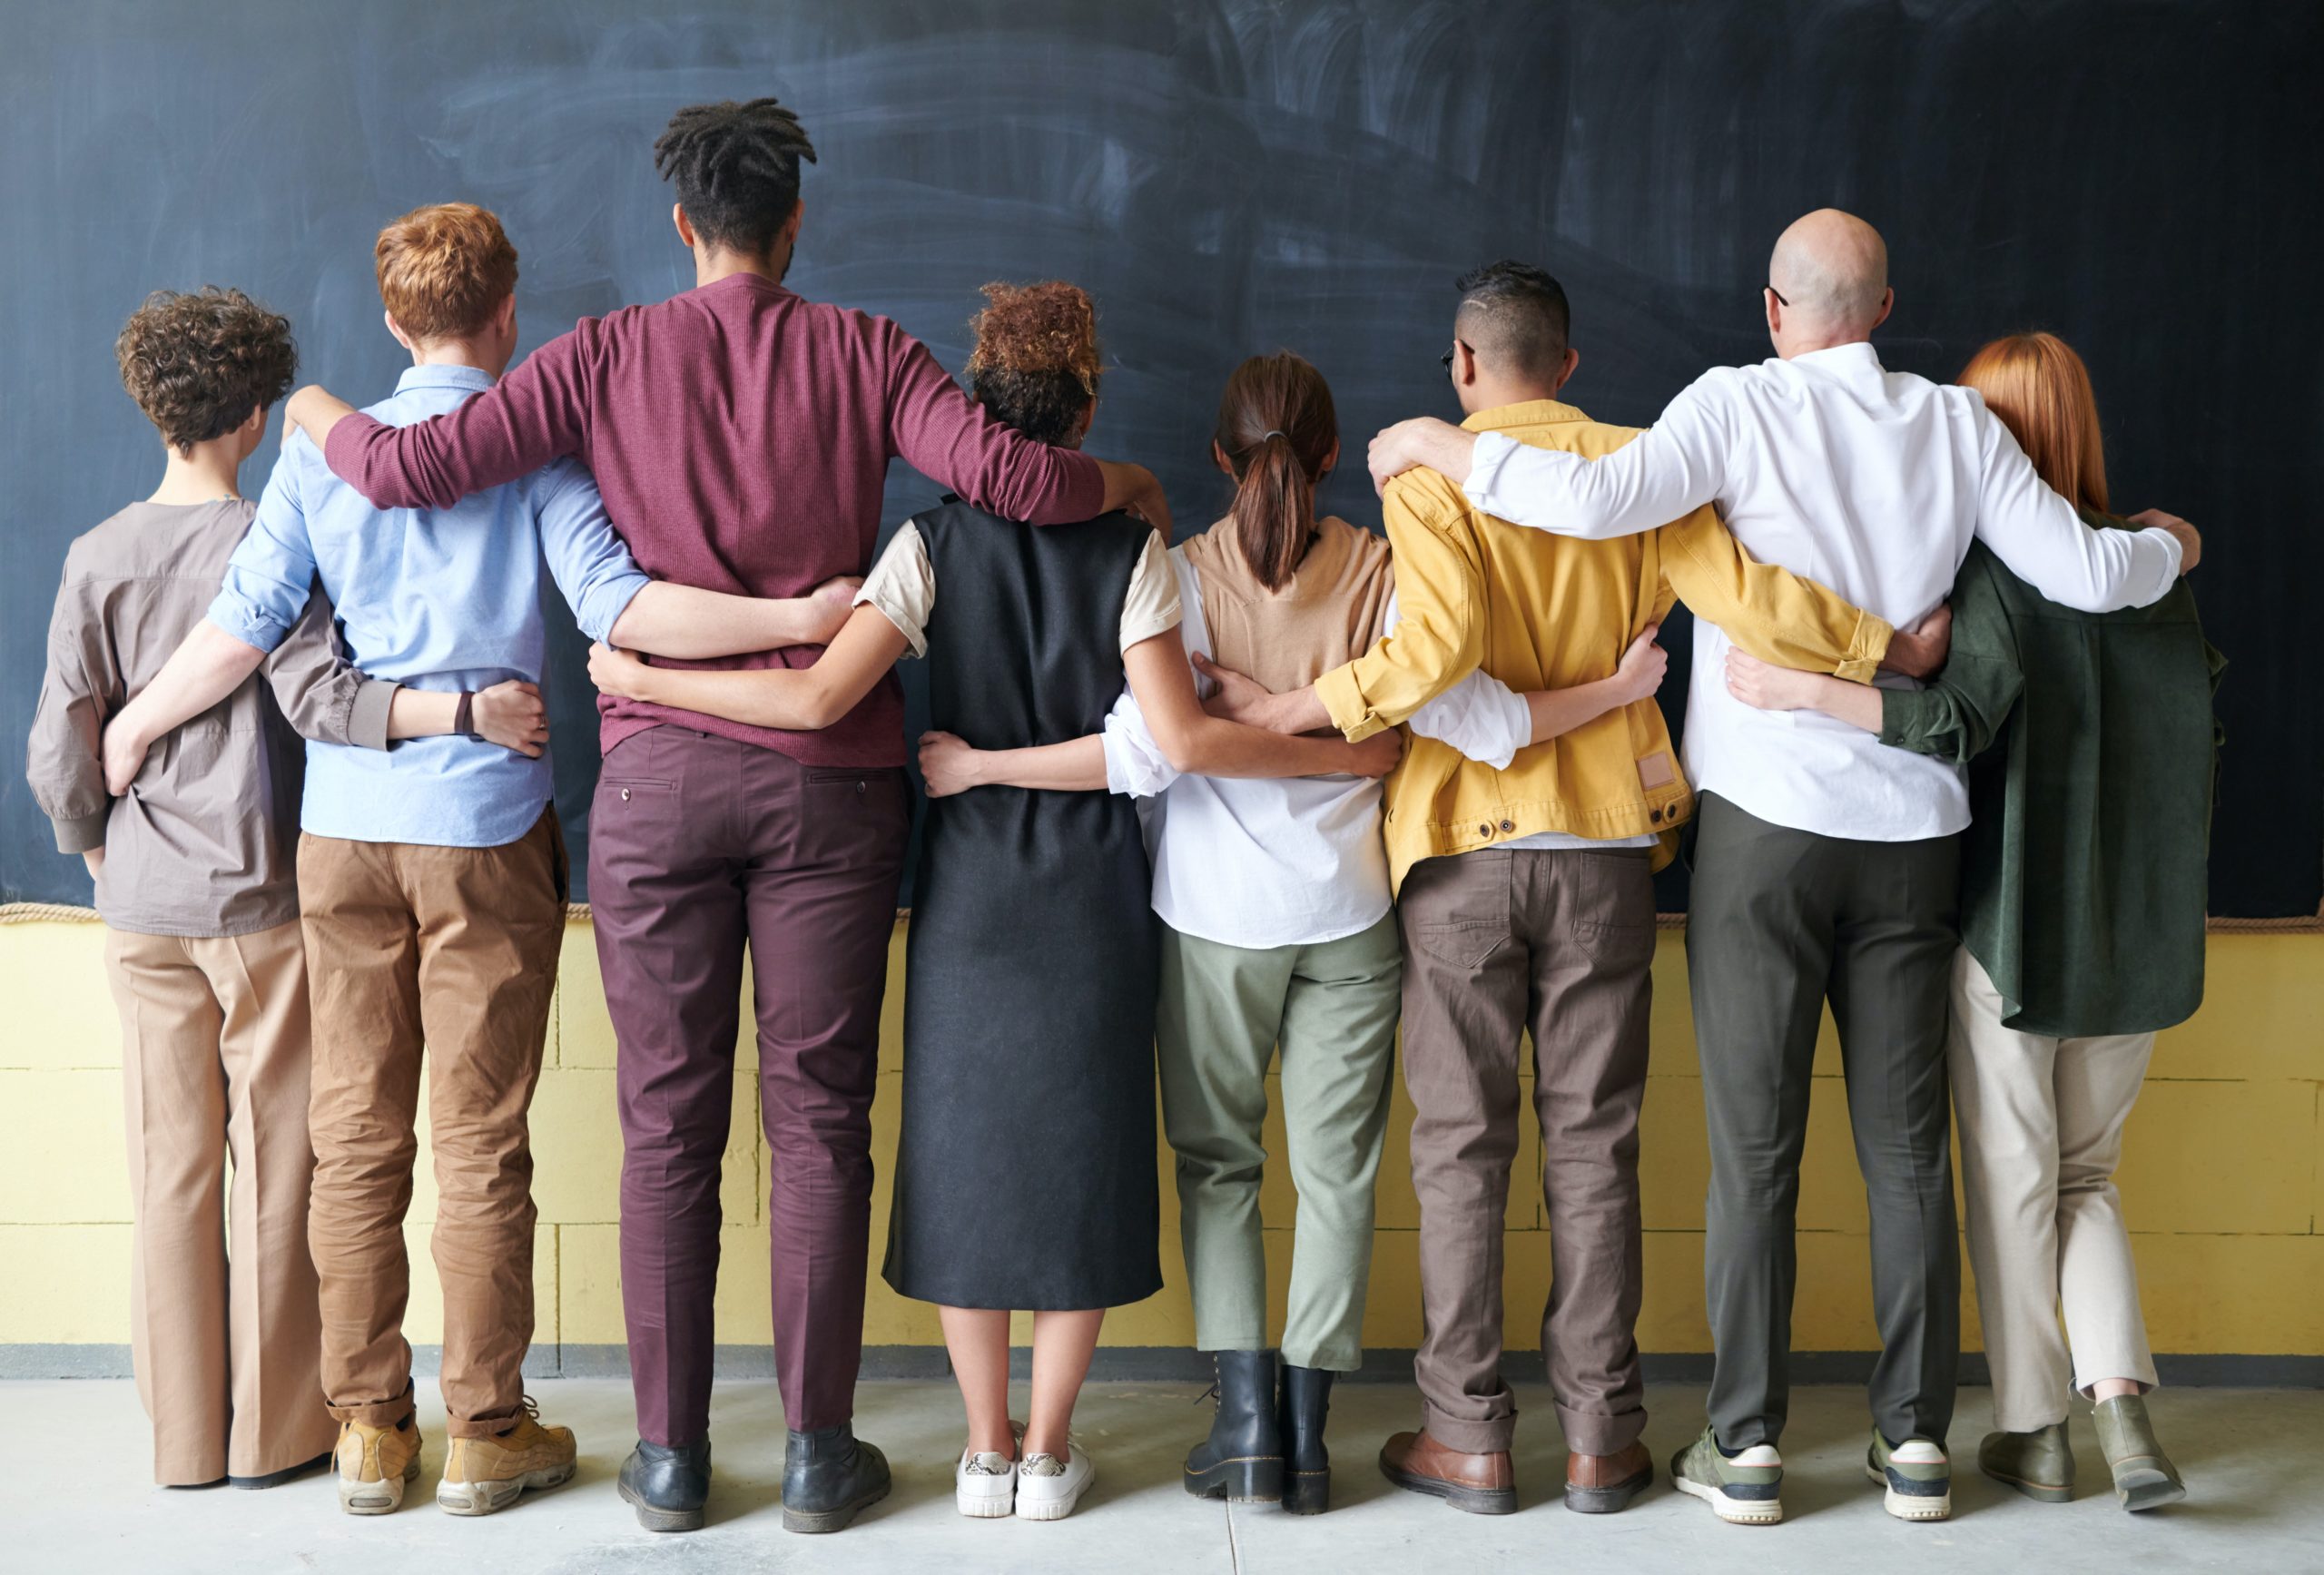 We’re better together: 5 ways to build allyship in the workplace